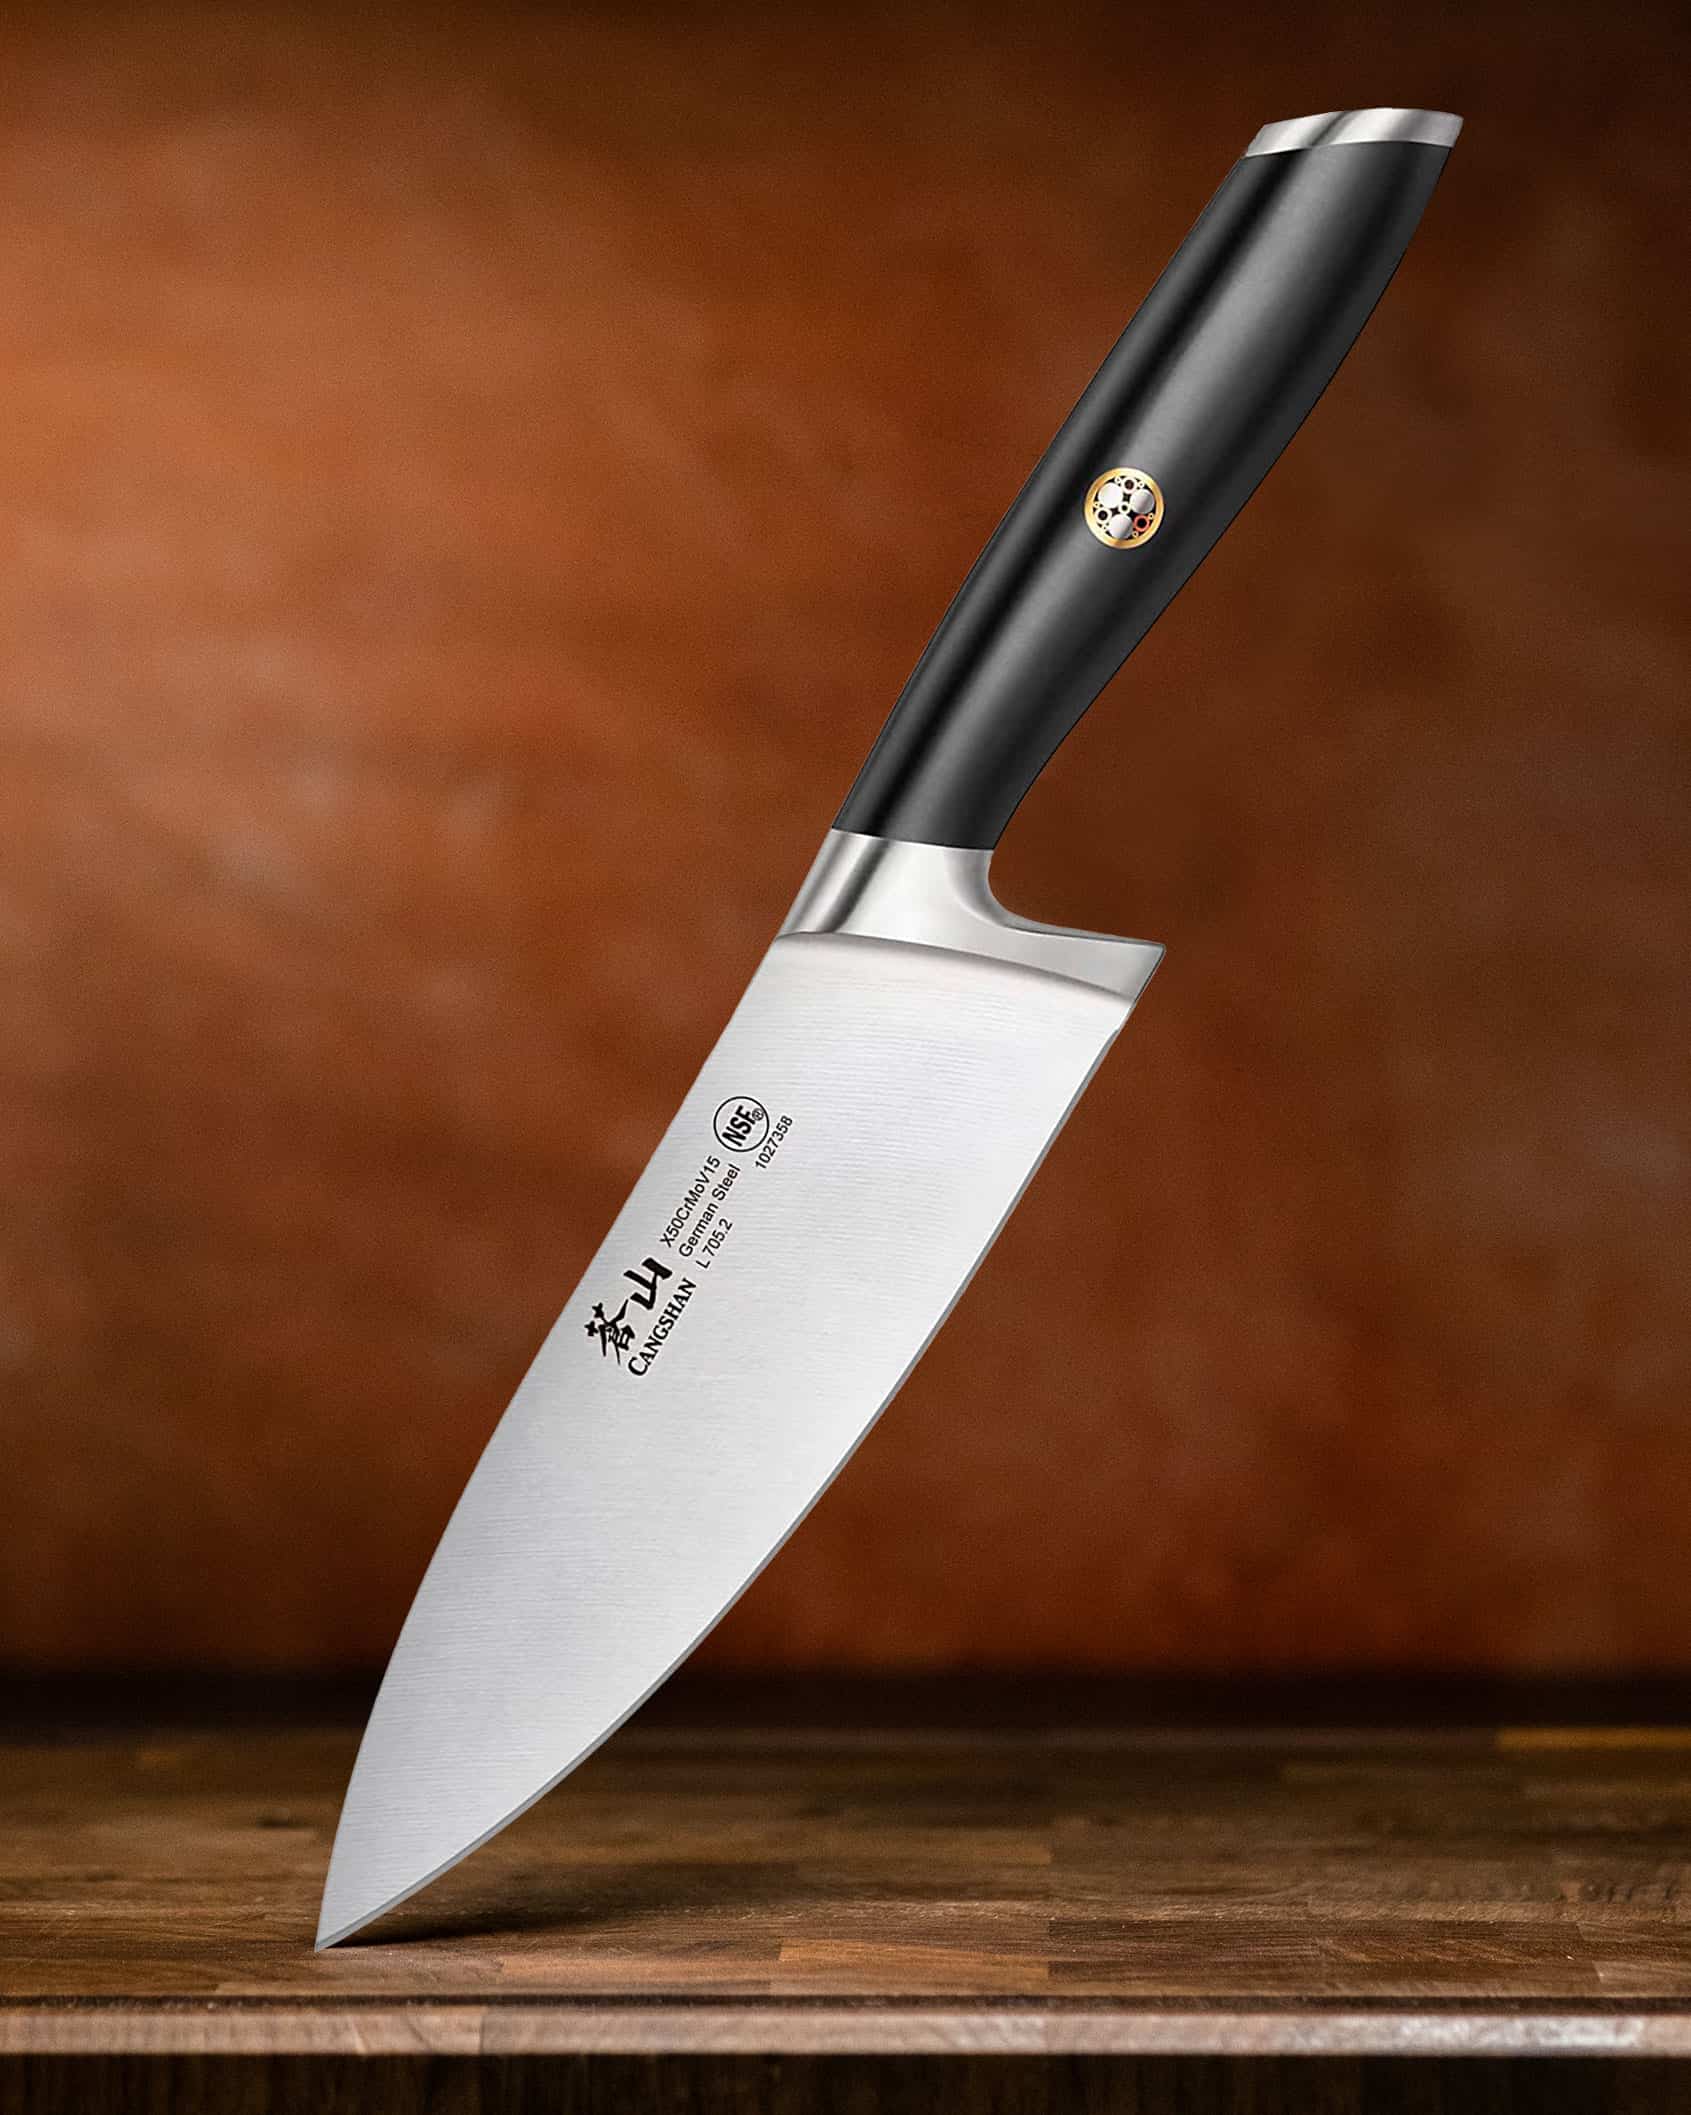 The Cangshan L series chef knife is a well balanced full bolster Western style chef knife.